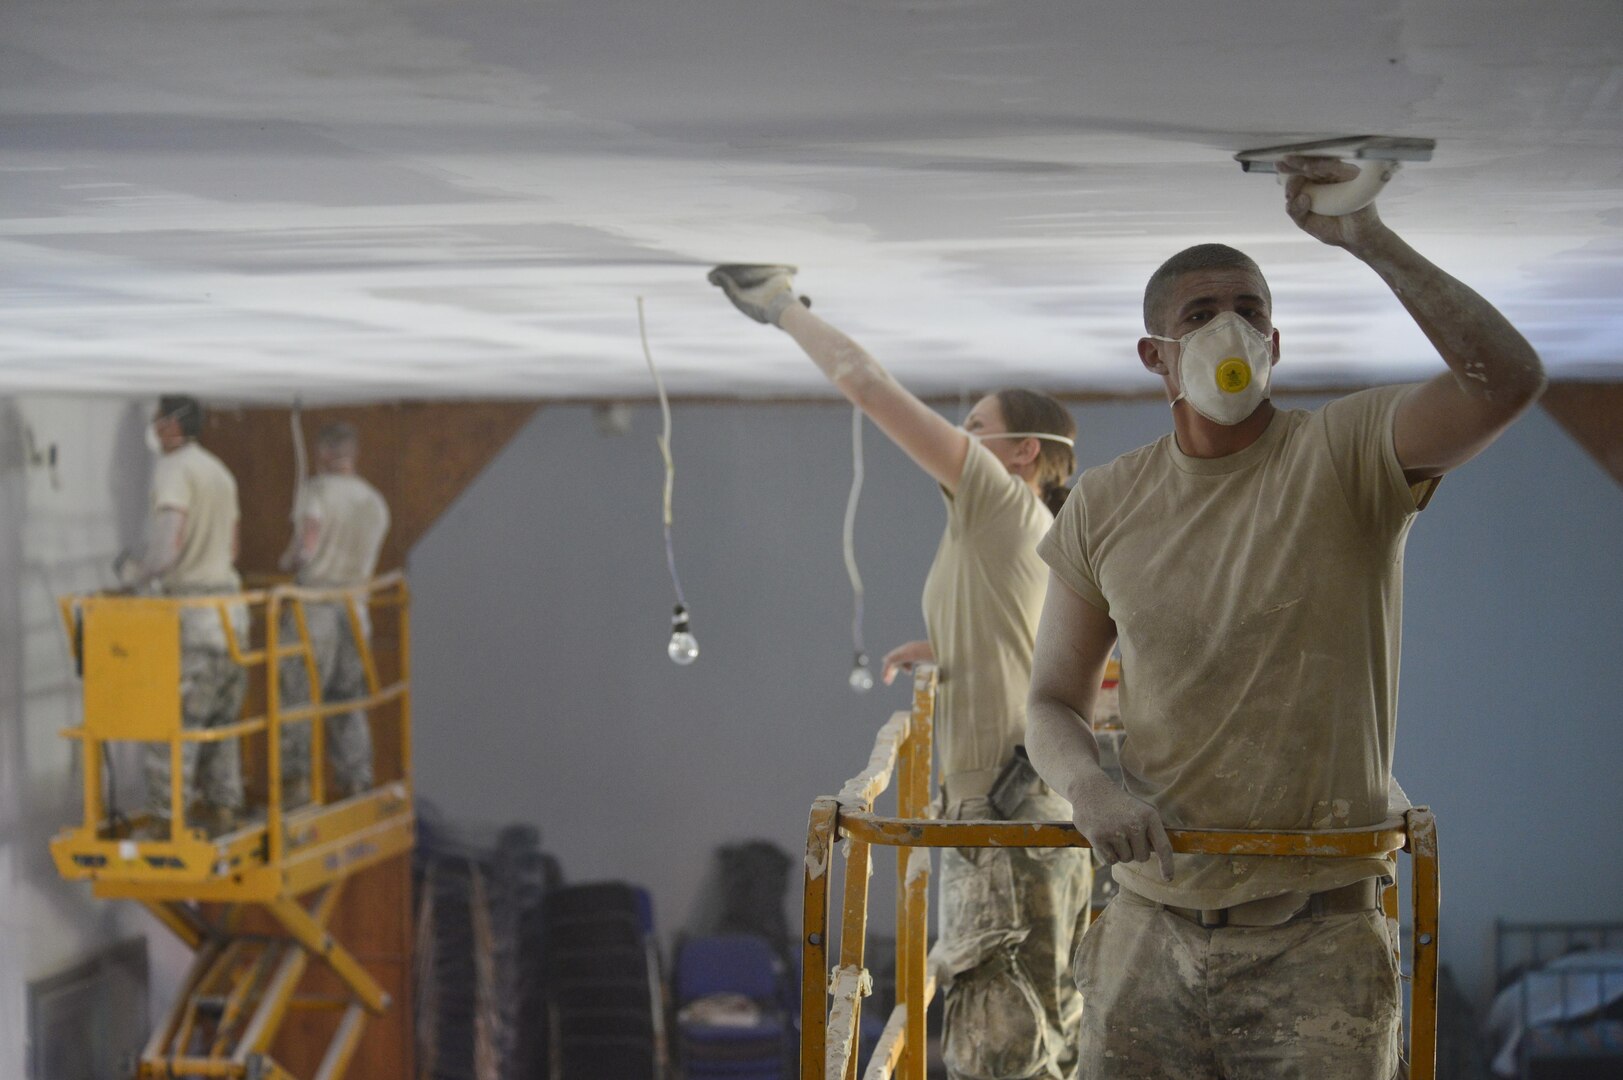 Spc. Christopher Anderson, carpentry/masonry specialist, sands and smooths plaster on the ceiling. He is with other Soldiers of the 851st Vertical Engineer Company and members of the Croatian Army, Armored Mechanic Brigade, working together for repairs and to rebuild a roof on a damaged community center in the local town of Račinovci, Croatia.  The project is a Humanitarian Civic Assistance project made possible by the U.S. European Command in partnership with the U.S. Embassy in Zagreb, Croatia.